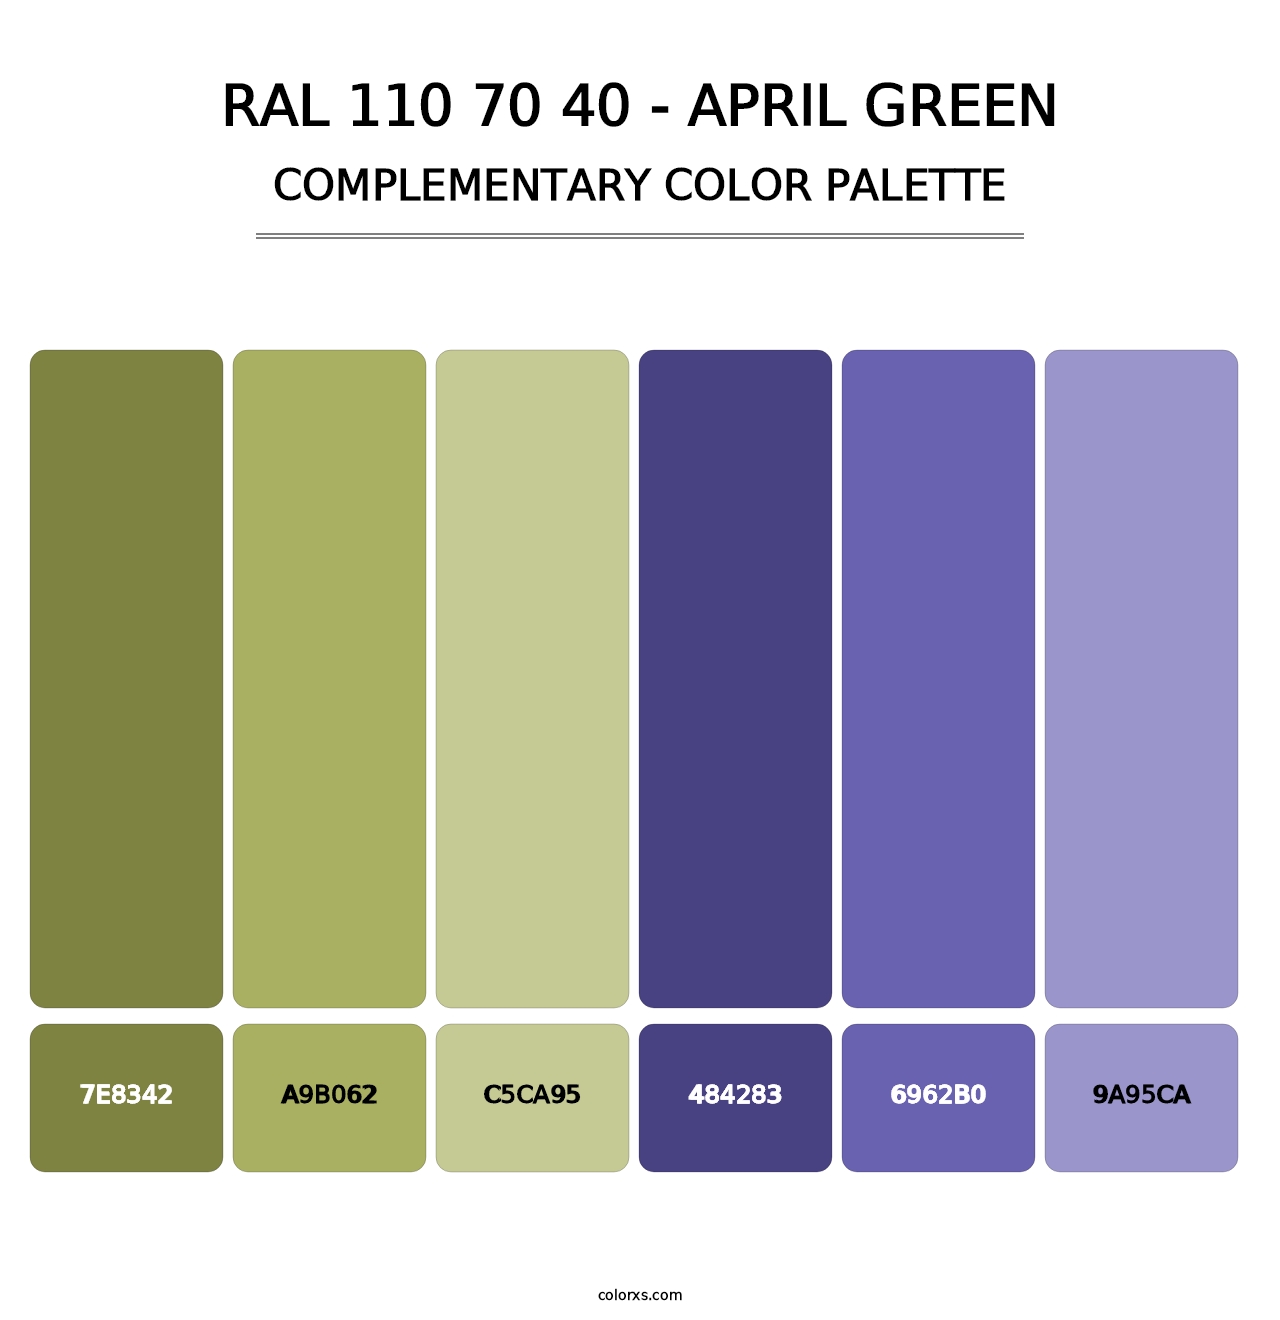 RAL 110 70 40 - April Green - Complementary Color Palette